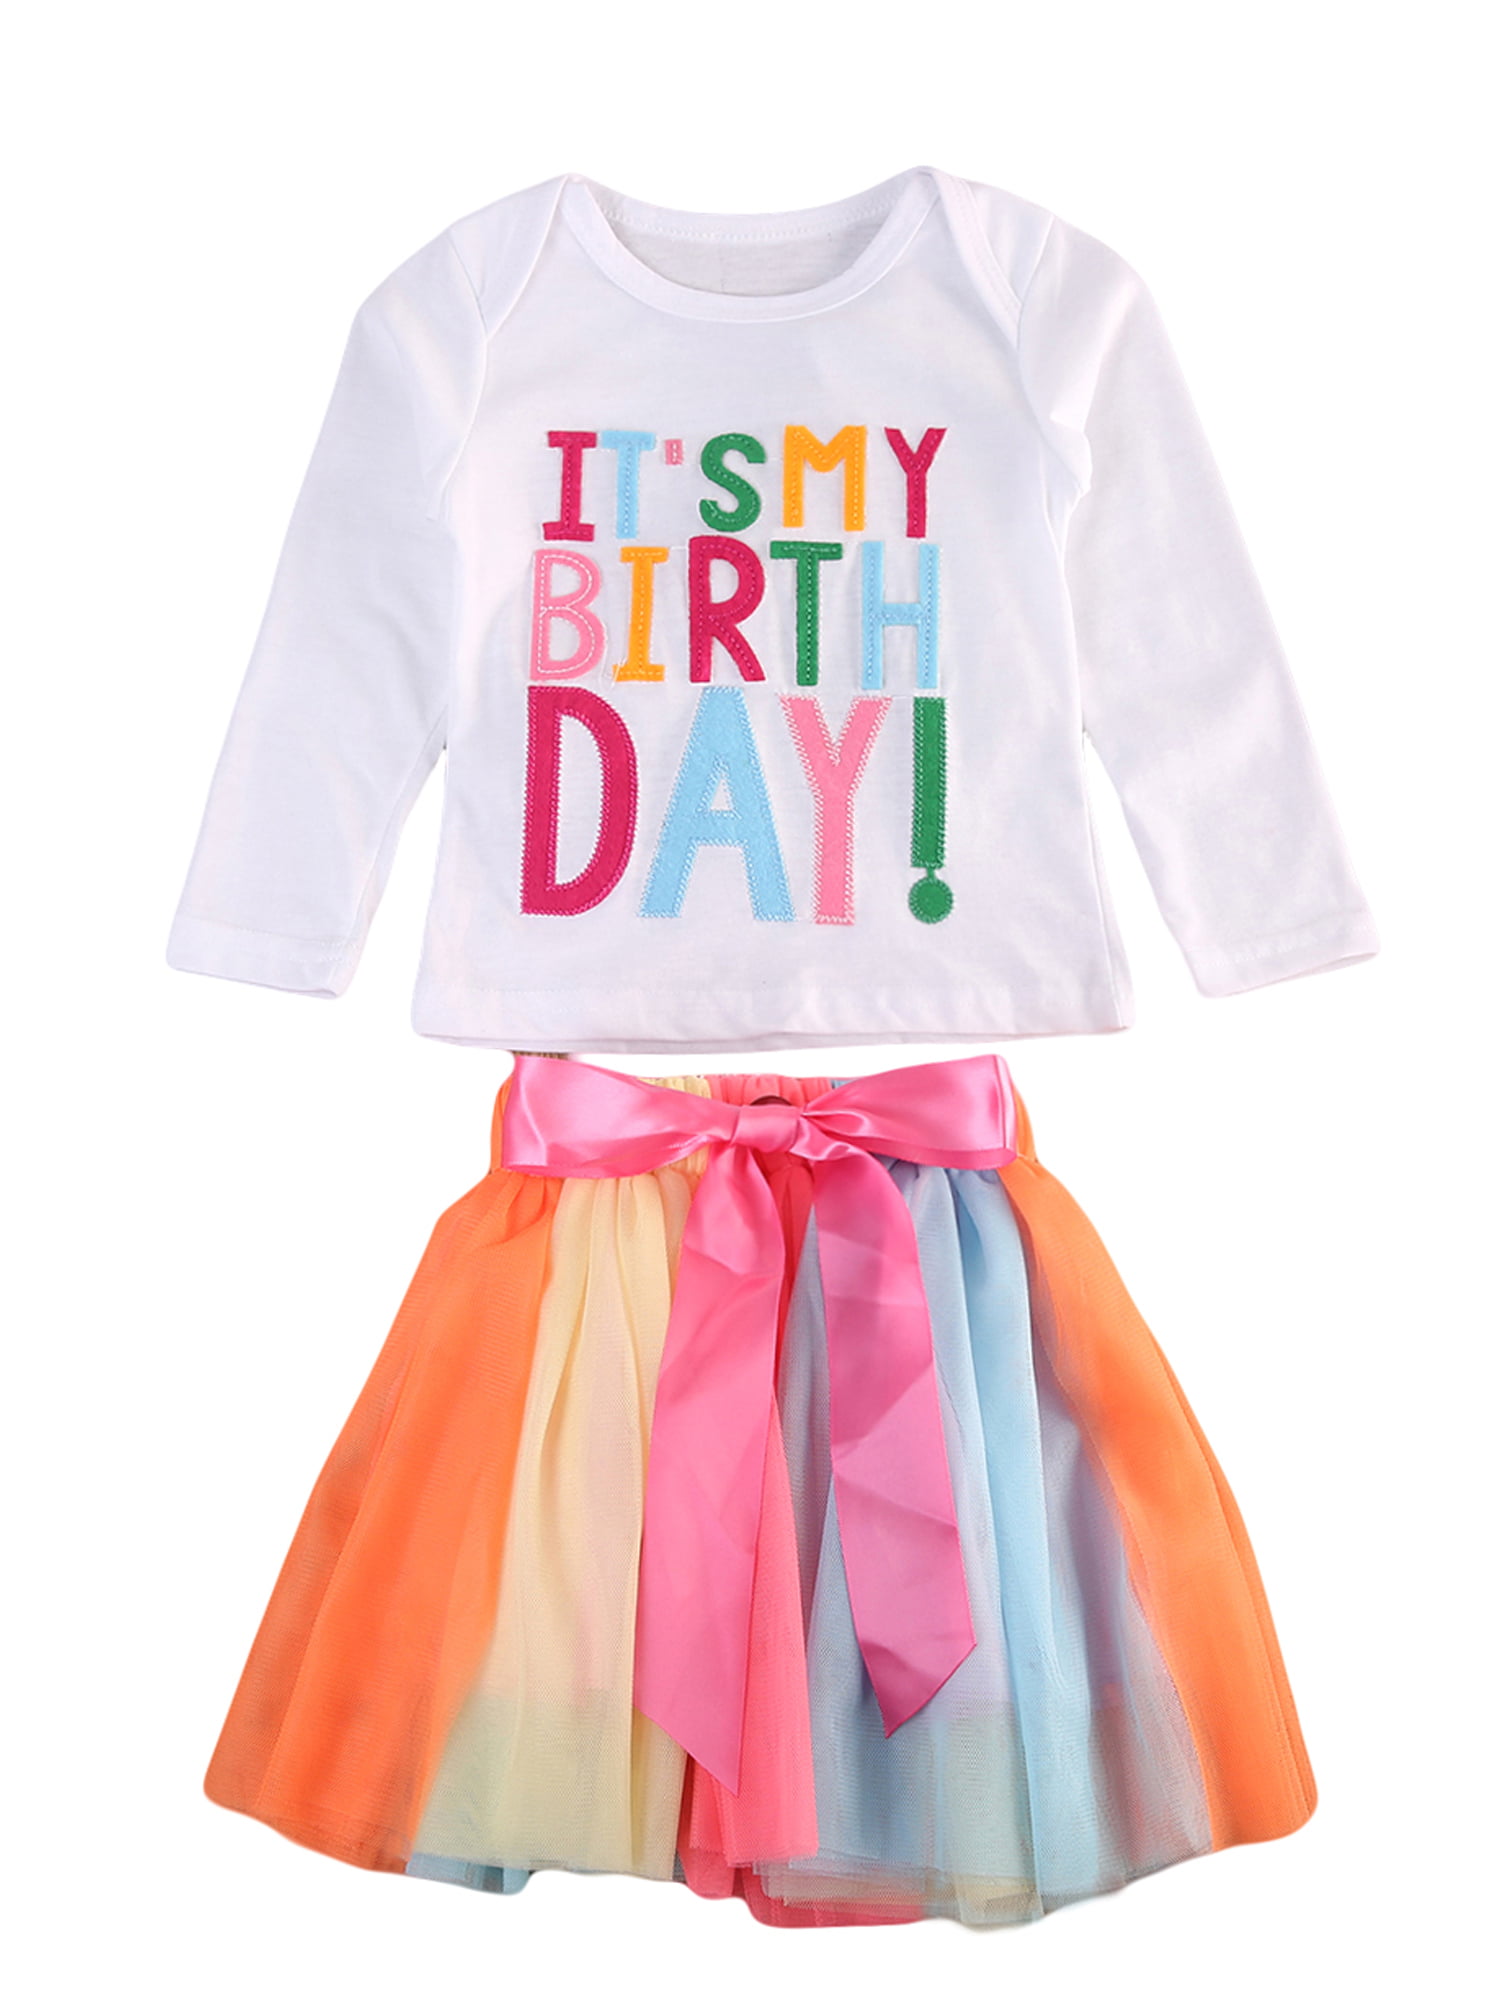 Baby Girls Birthday Clothes Tutu Skirts Party Dress+Top T-shirt Princess Outfits